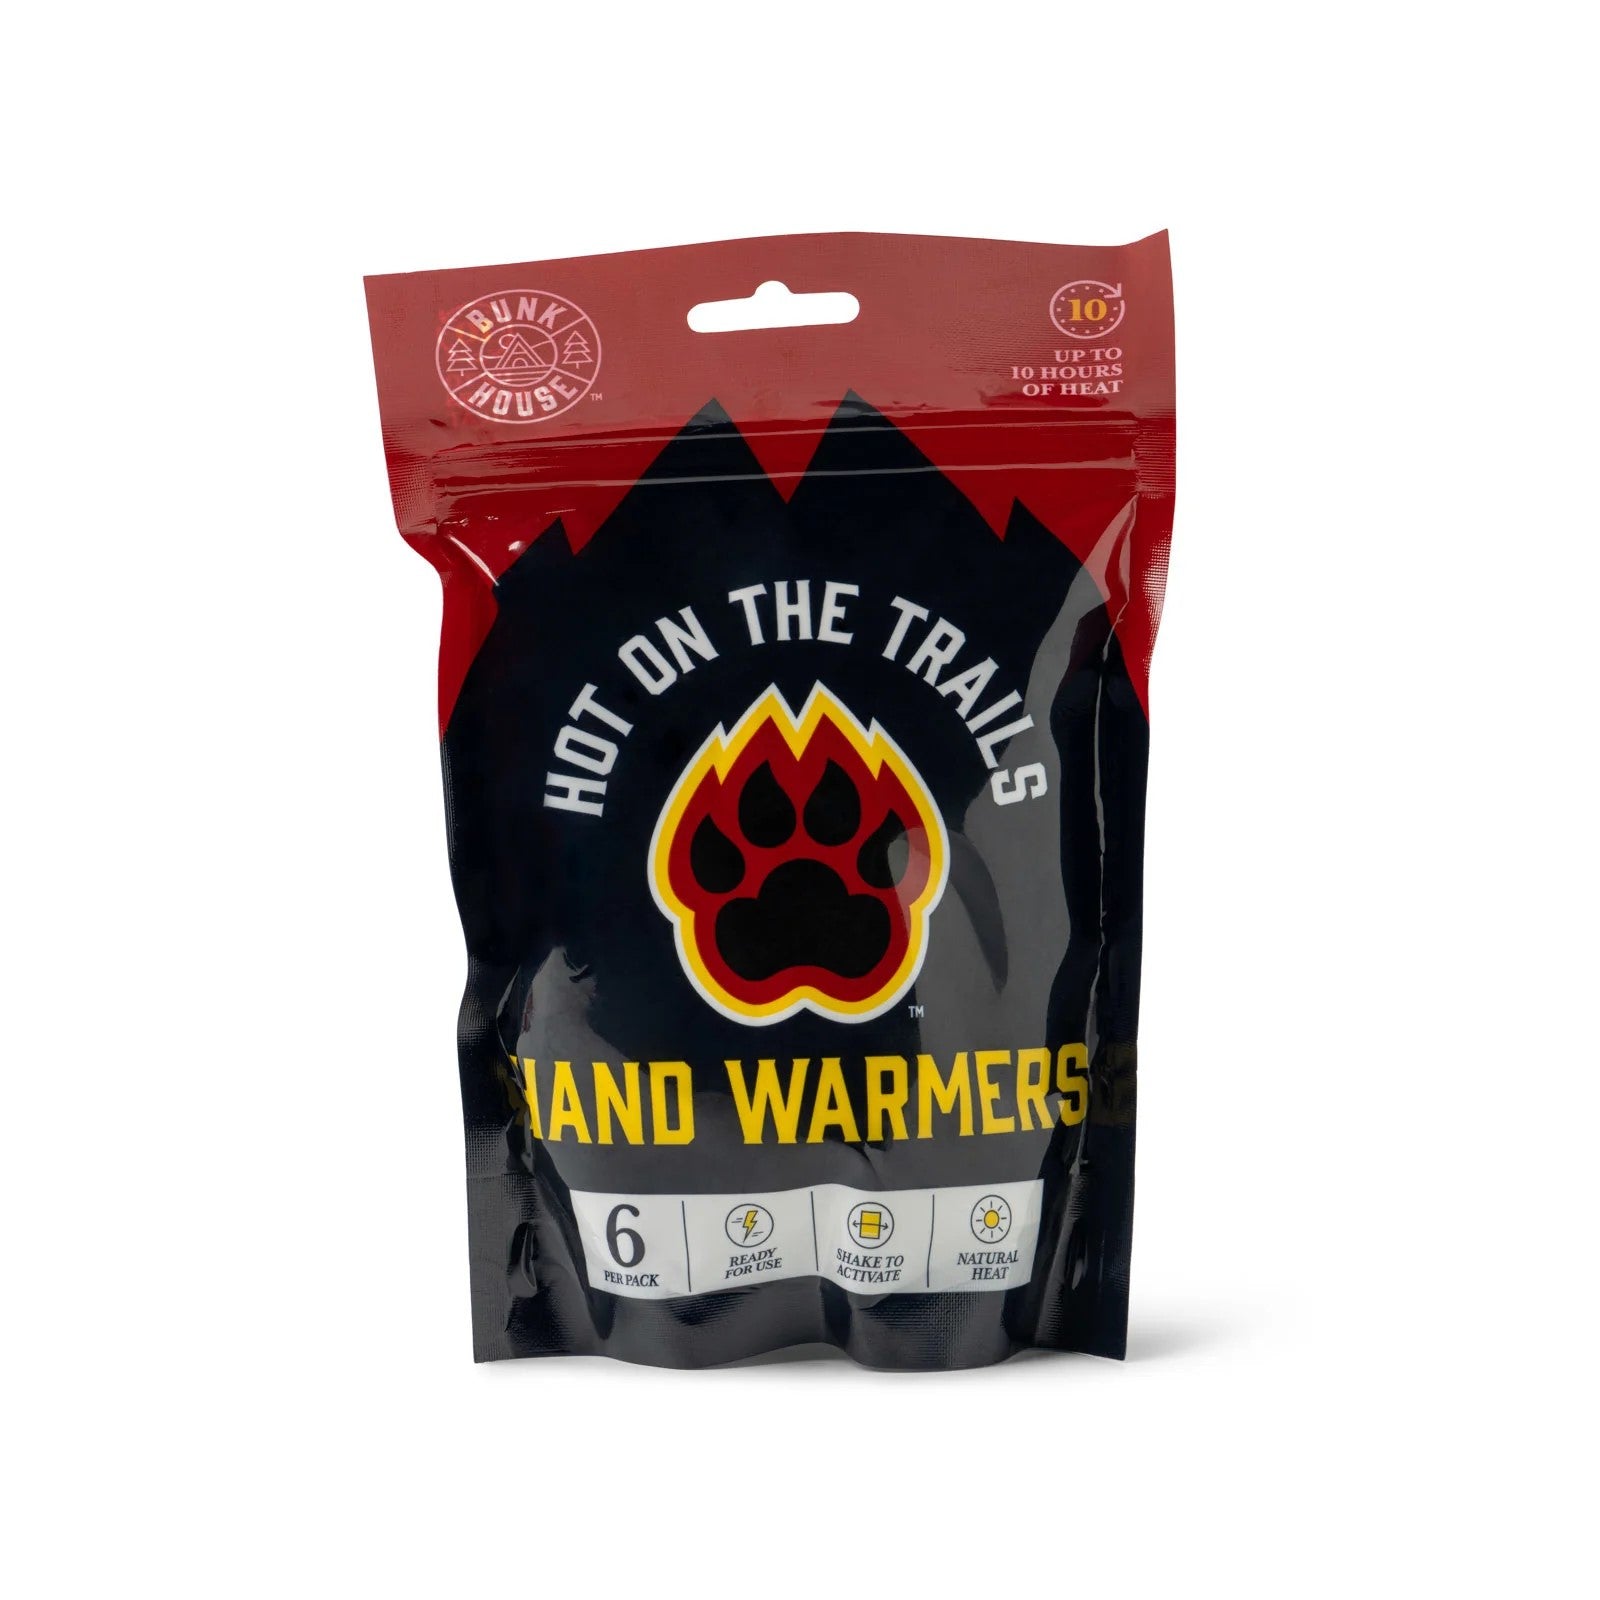 Hot on the Trails Hand Warmers